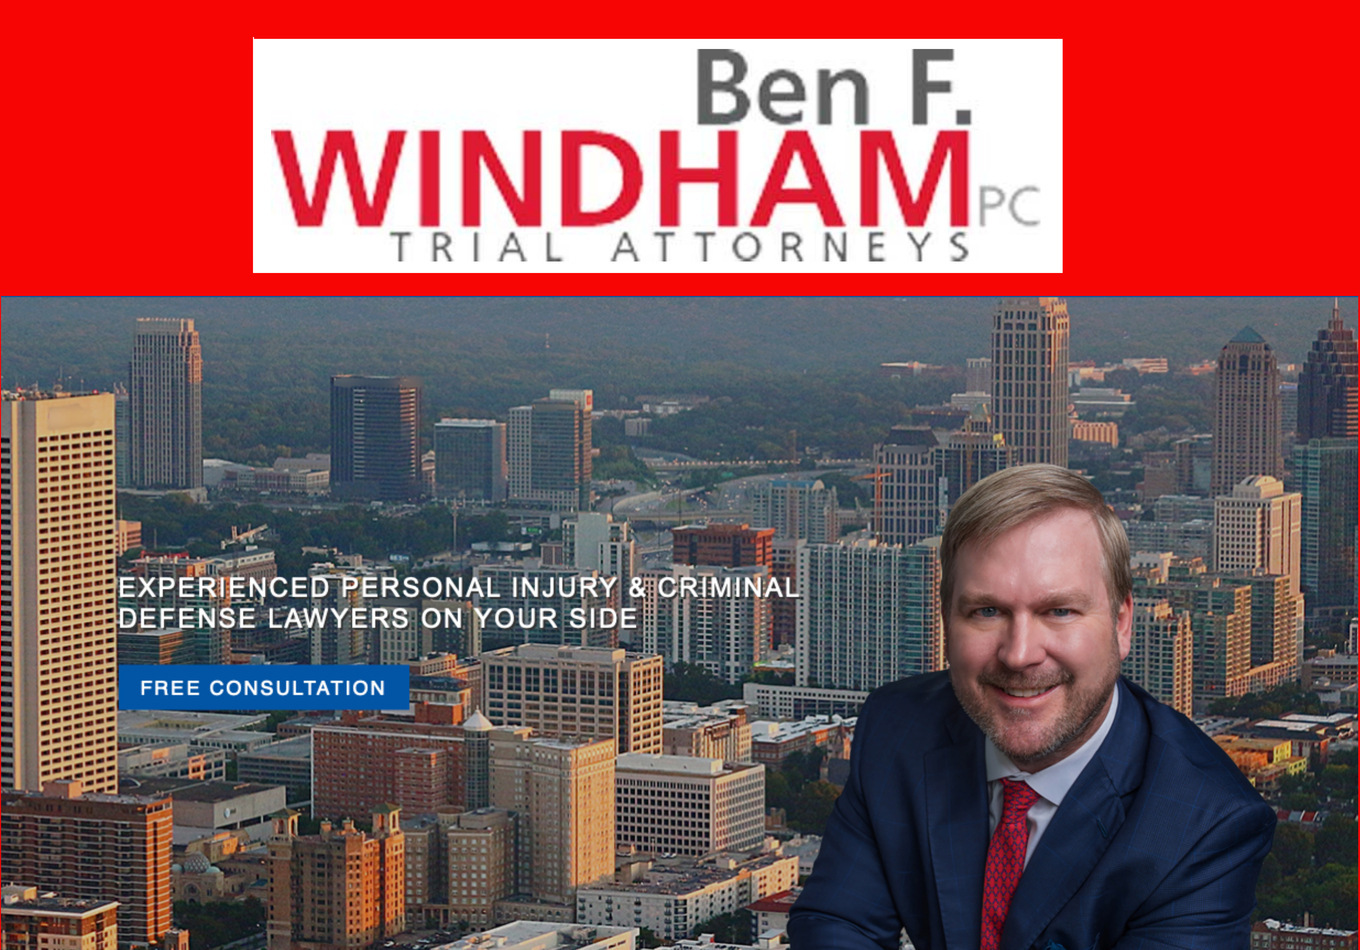 Ben F. Windham P.C., Friday, February 19, 2021, Press release picture